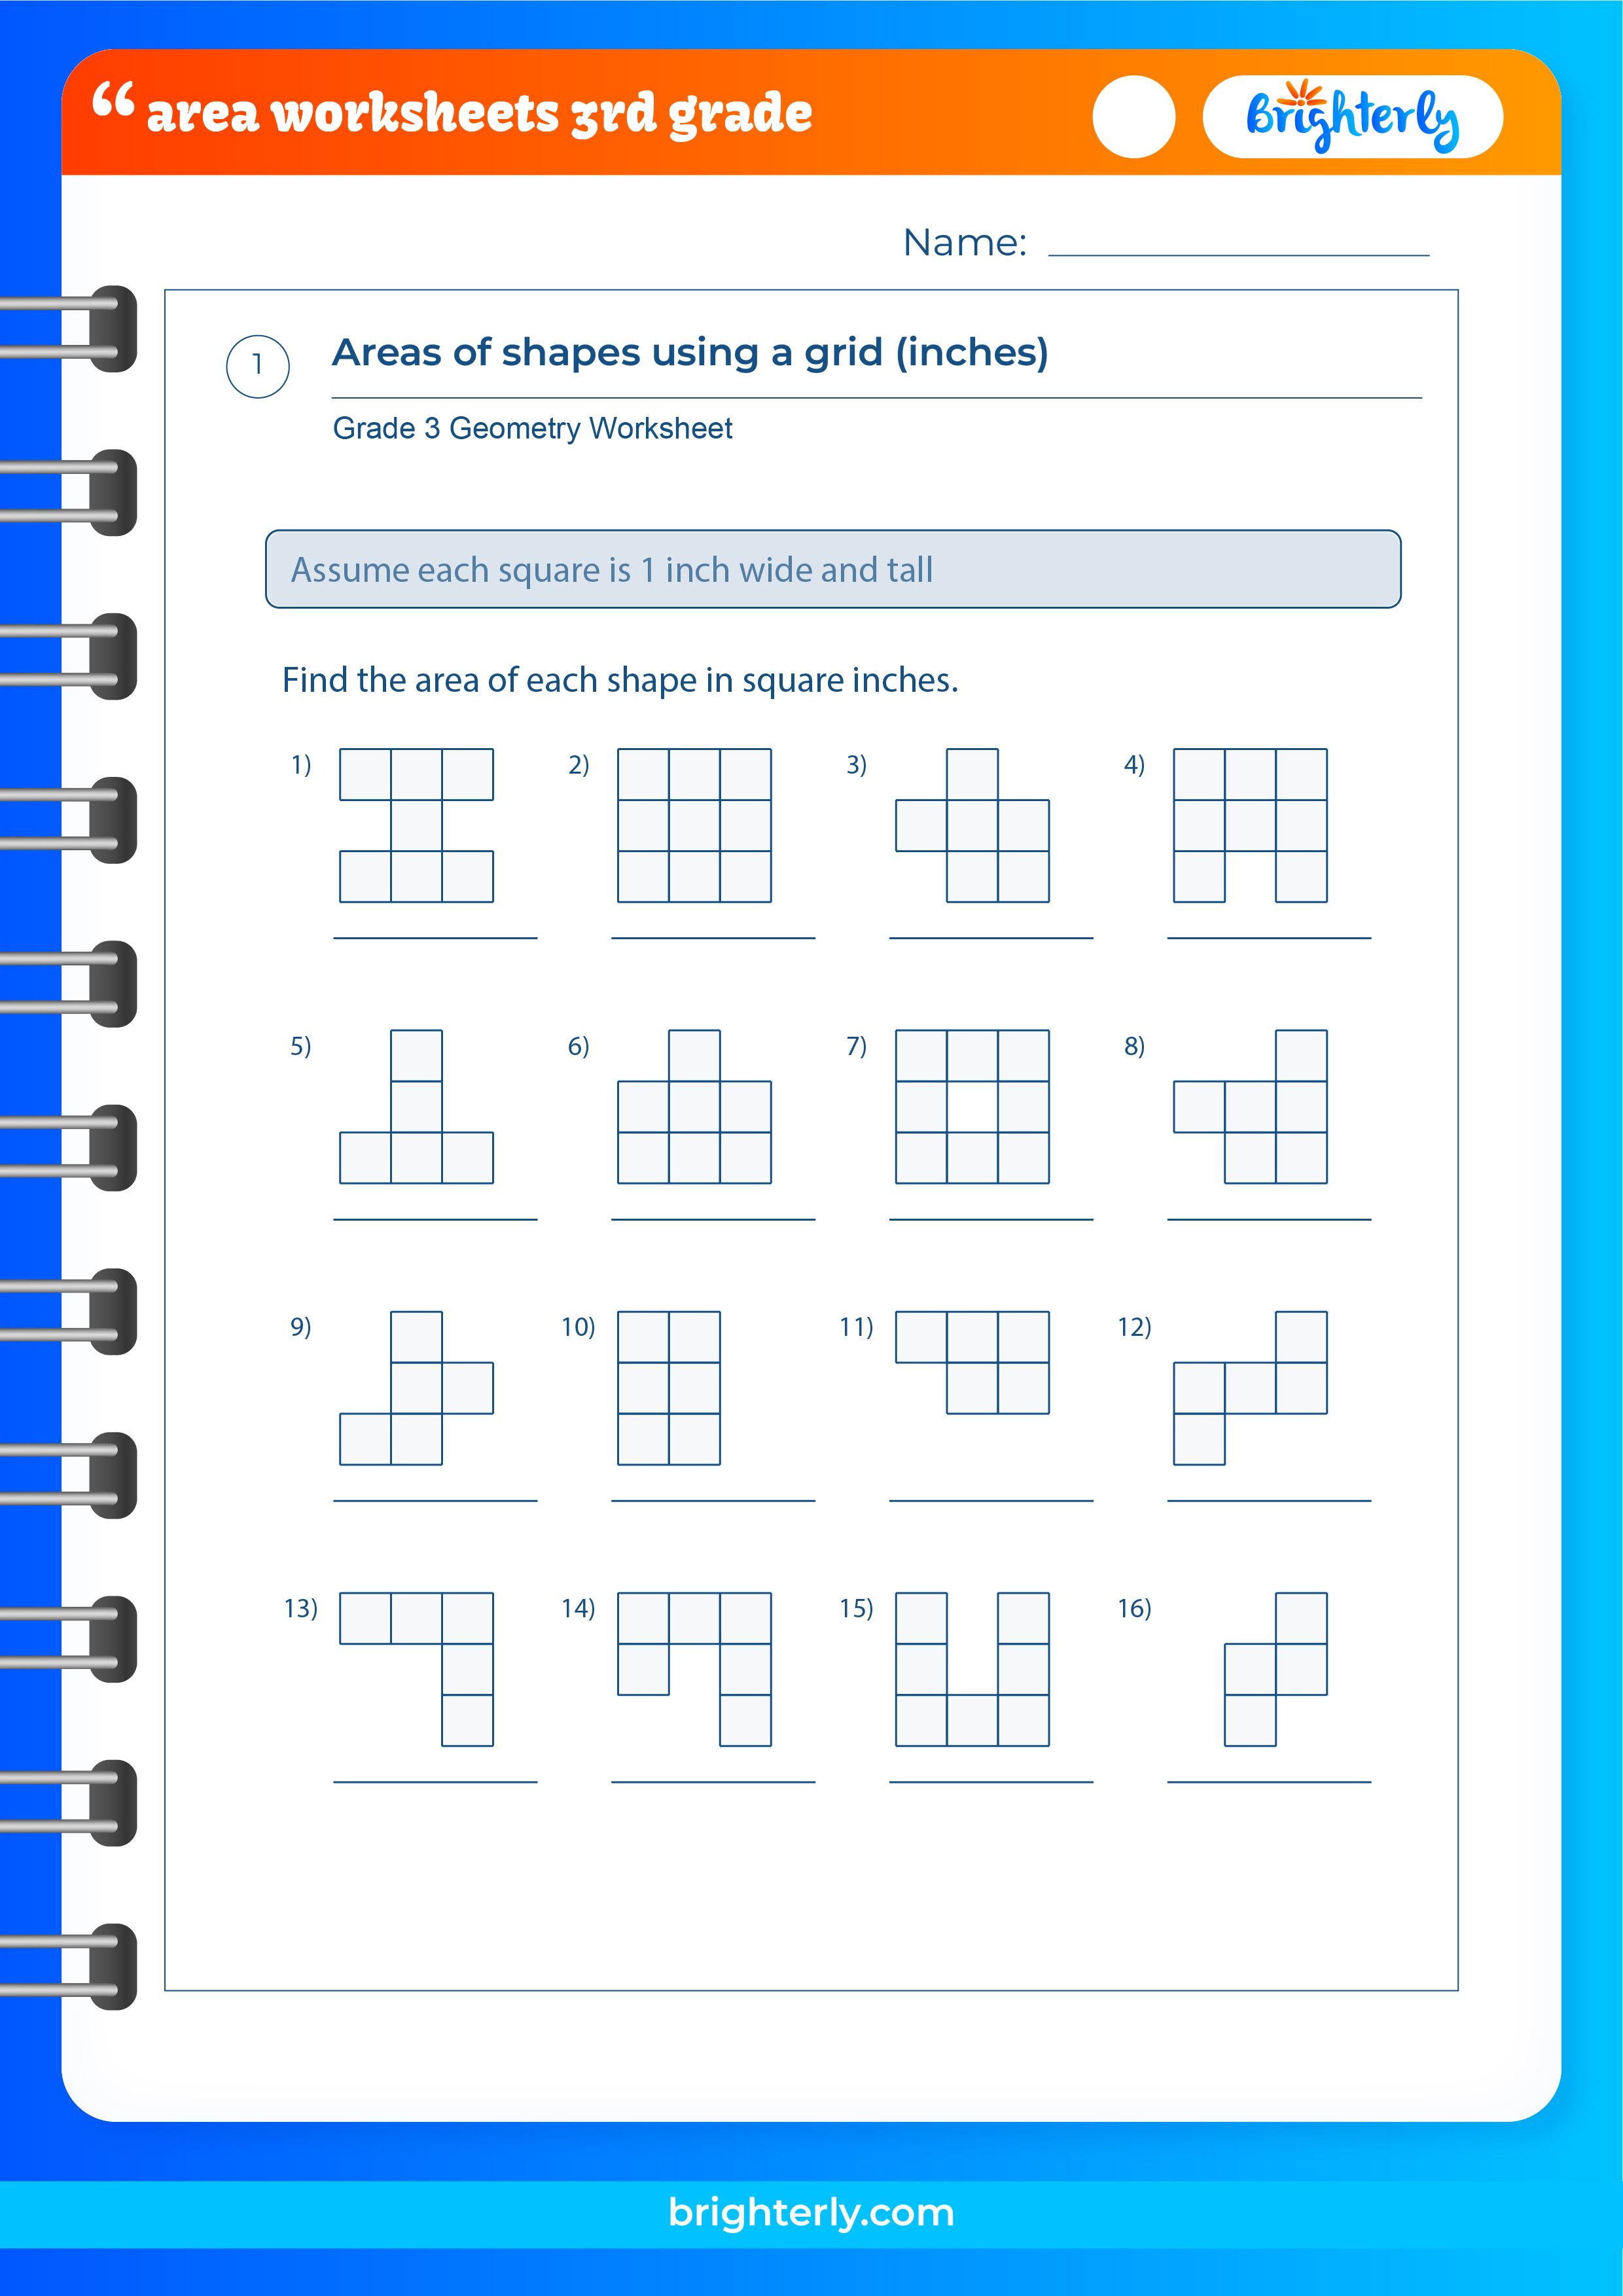 Free Area Worksheets for 3rd Grade Students PDFs Brighterly